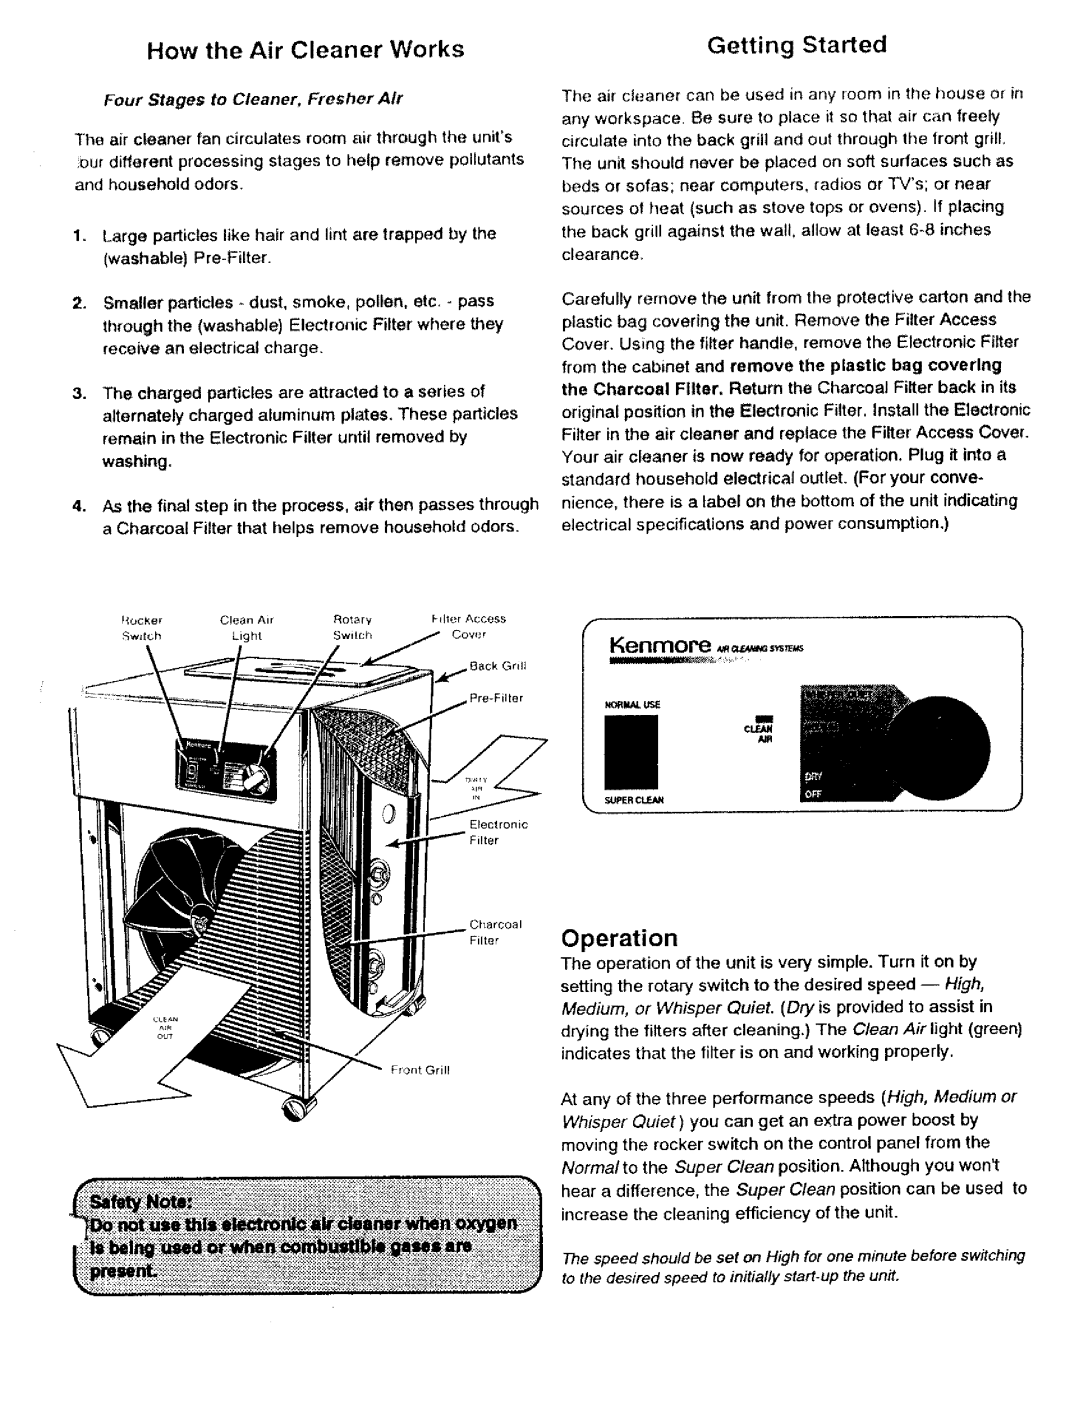 Sears 635.83142 owner manual Operation, How the Air Cleaner Works, Getting Started 